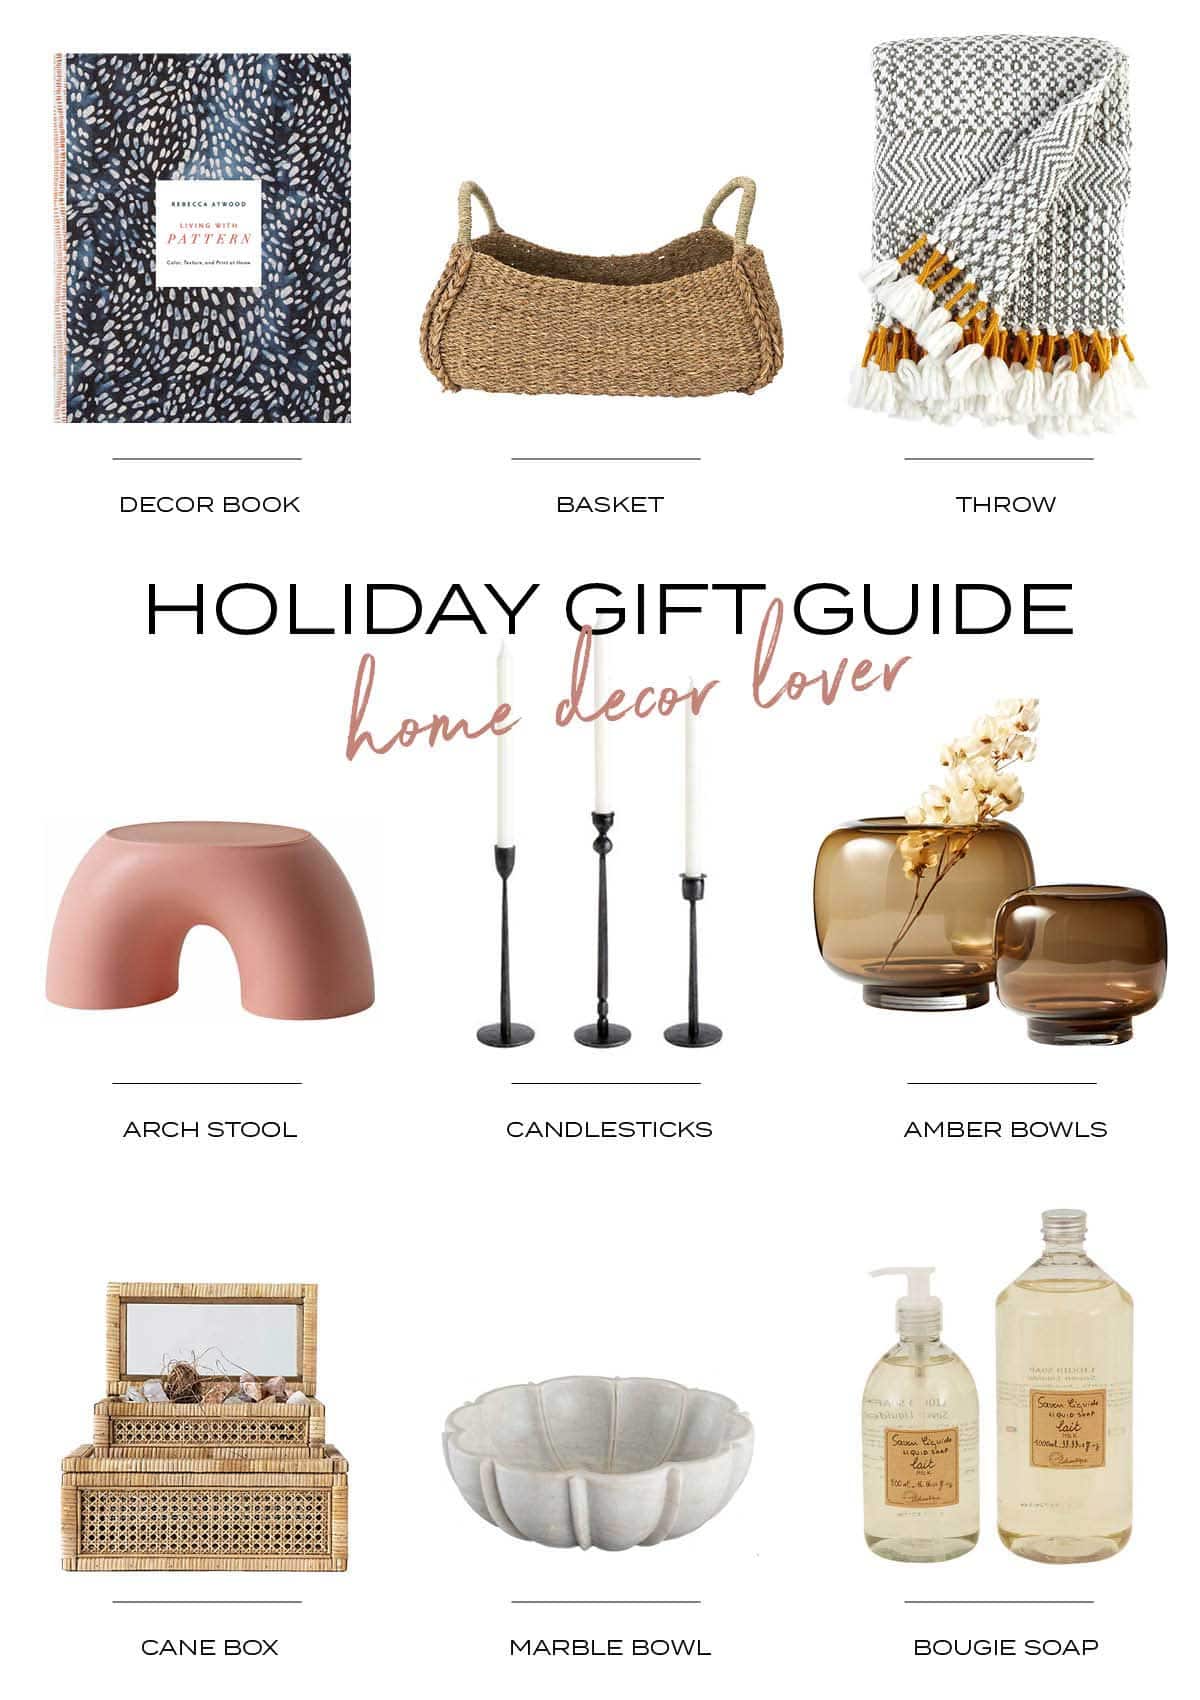 https://houseofhipsters.com/wp-content/uploads/2021/11/holiday-gift-guide-home-decor.jpg